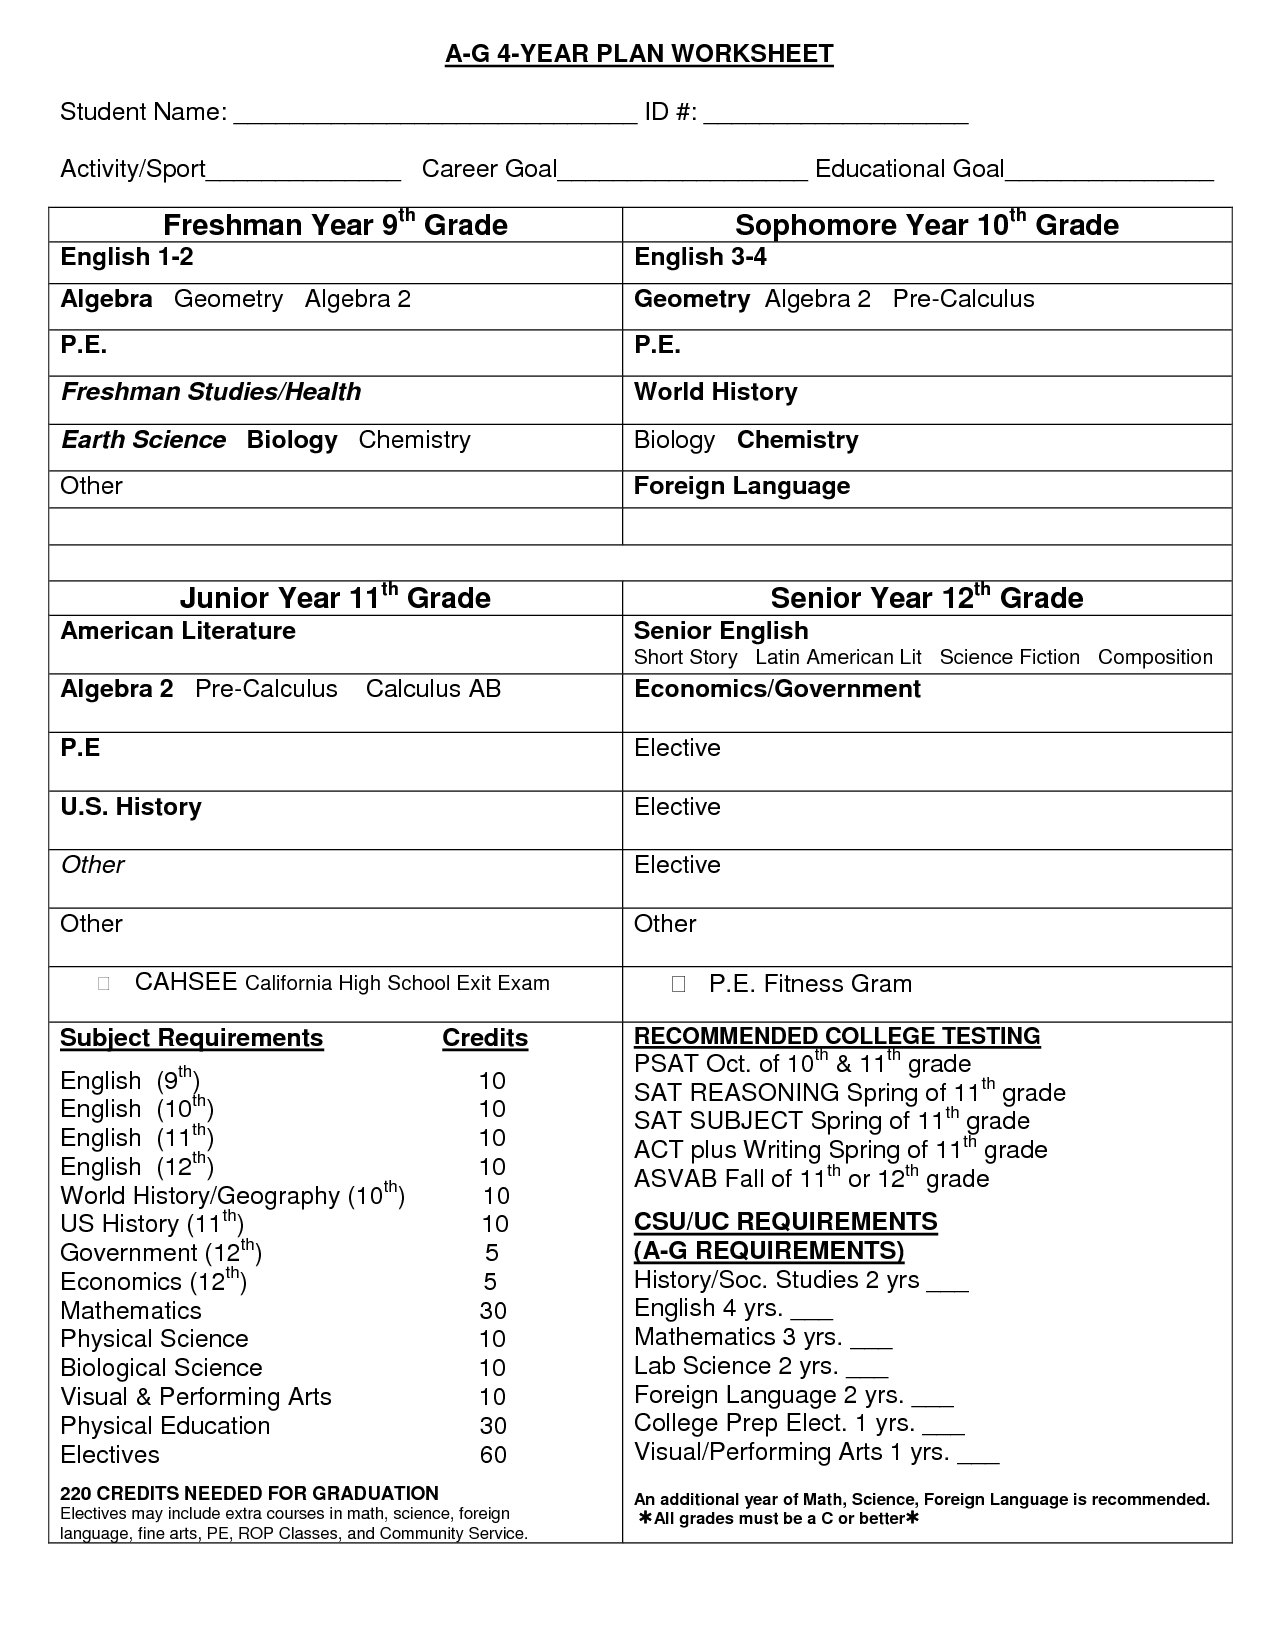 15-best-images-of-us-history-exam-11th-grade-worksheets-9th-grade-vocabulary-worksheets-8th